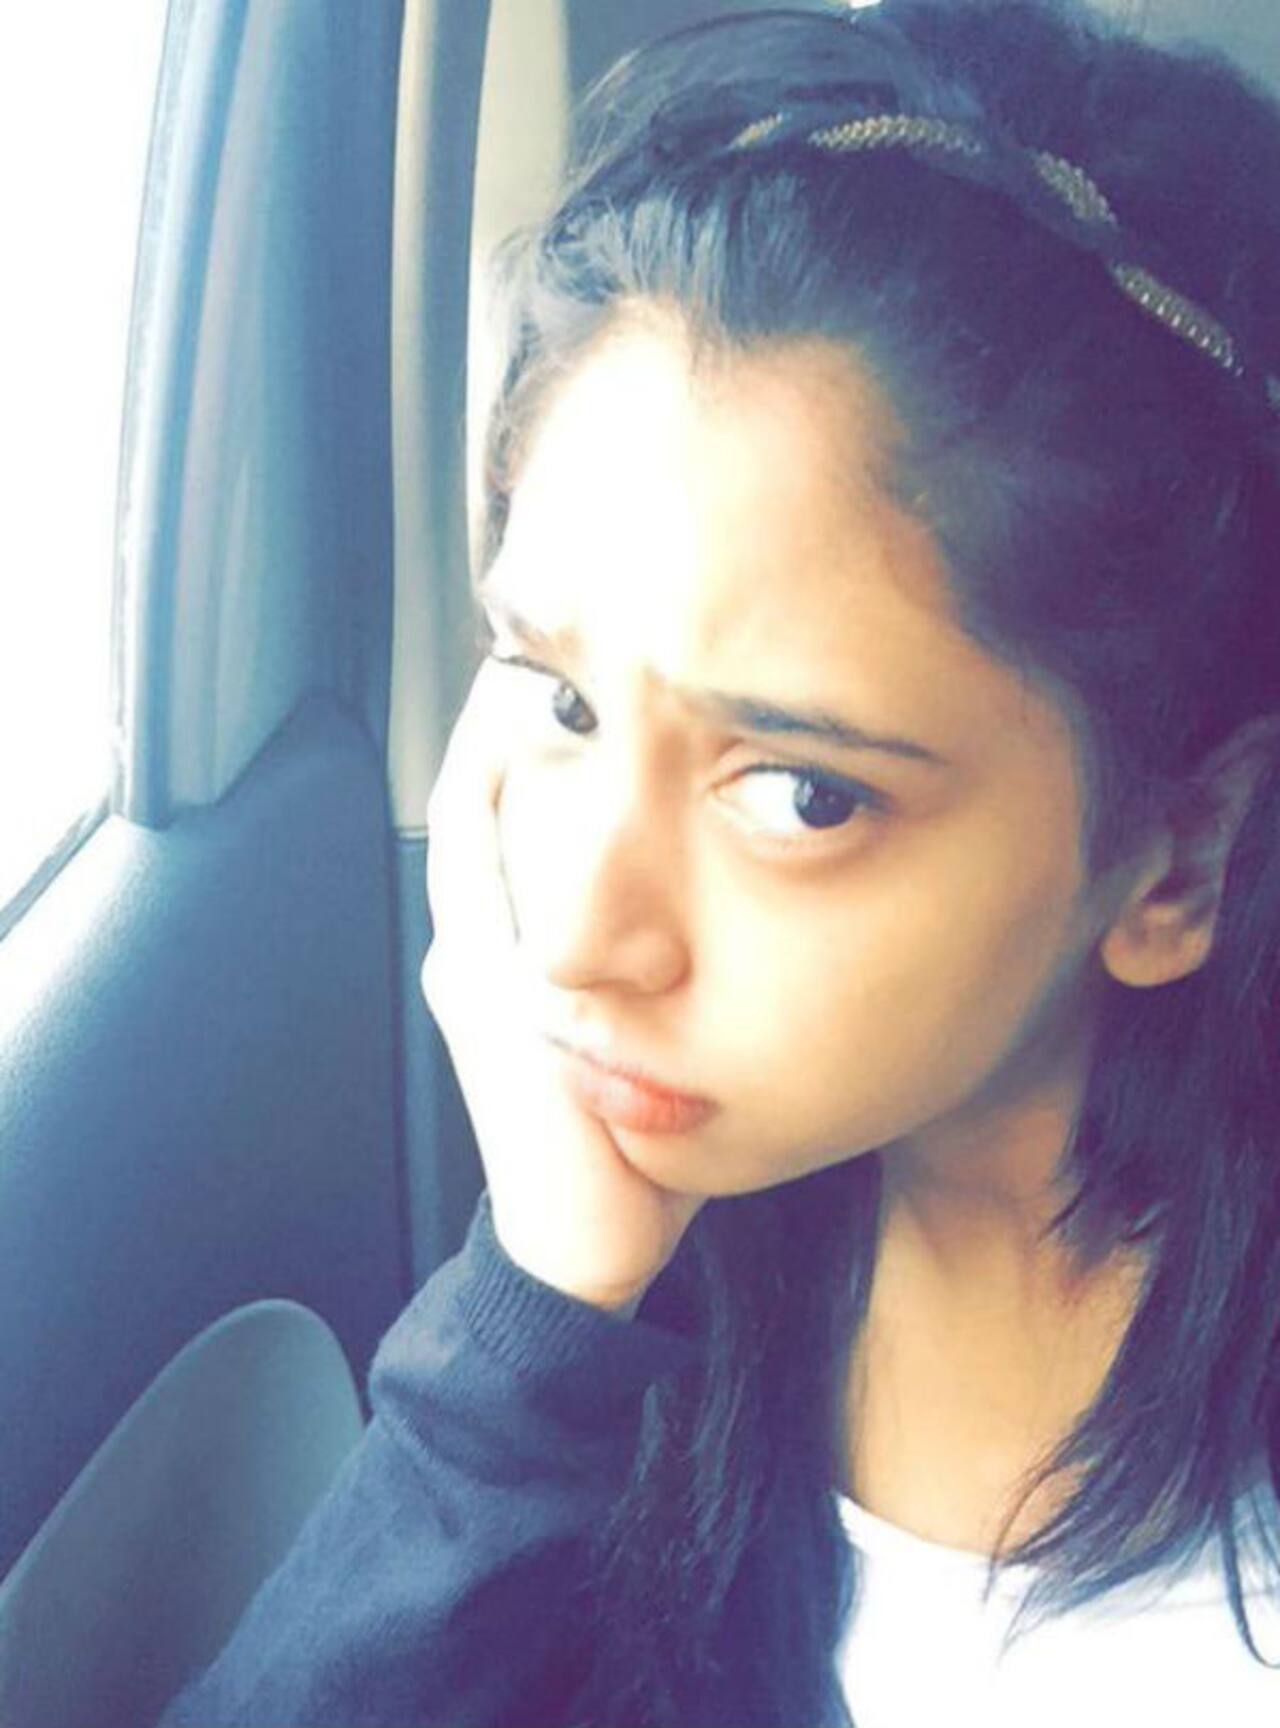 Post Parth Samthaan's exit, his Kaisi Yeh Yaariyan co-star Niti Taylor takes to Twitter and asks fans to give season 2 a chance!